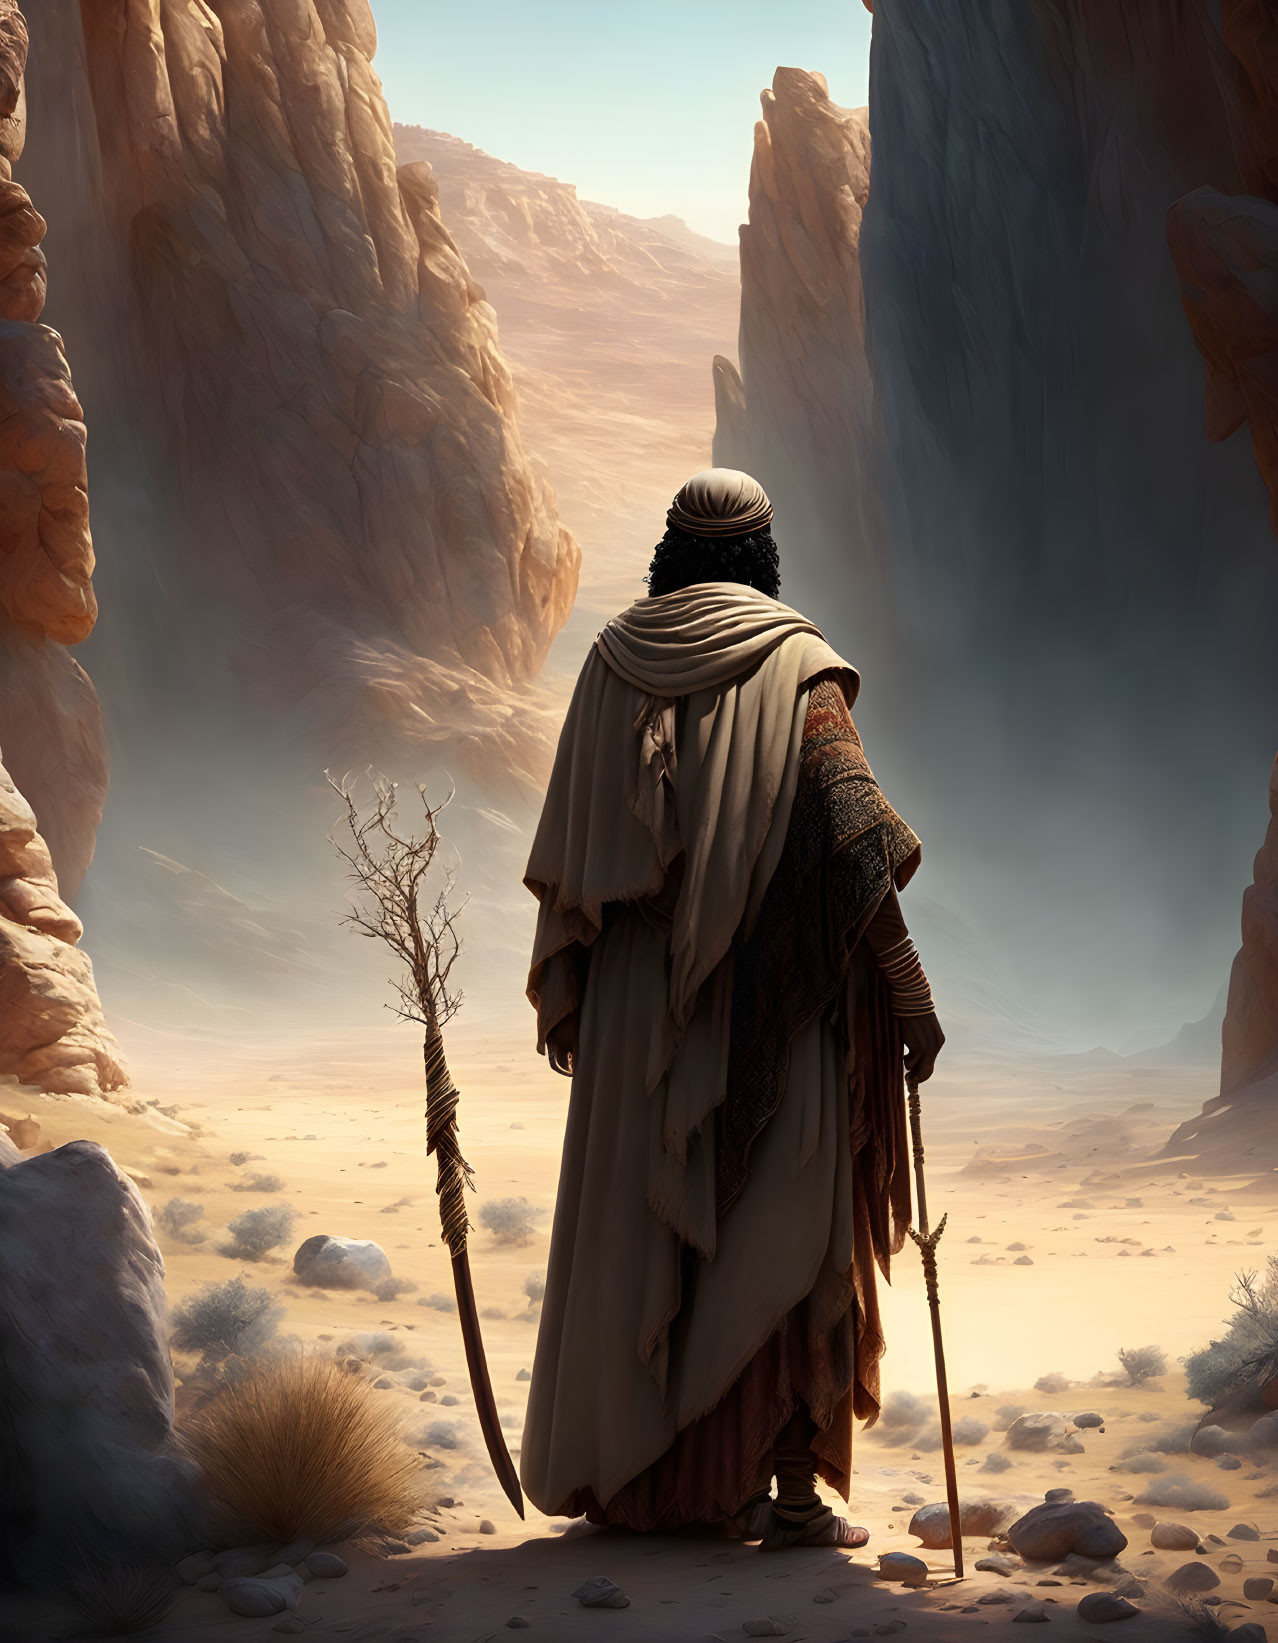 Mysterious cloaked figure with staff in desert canyon landscape